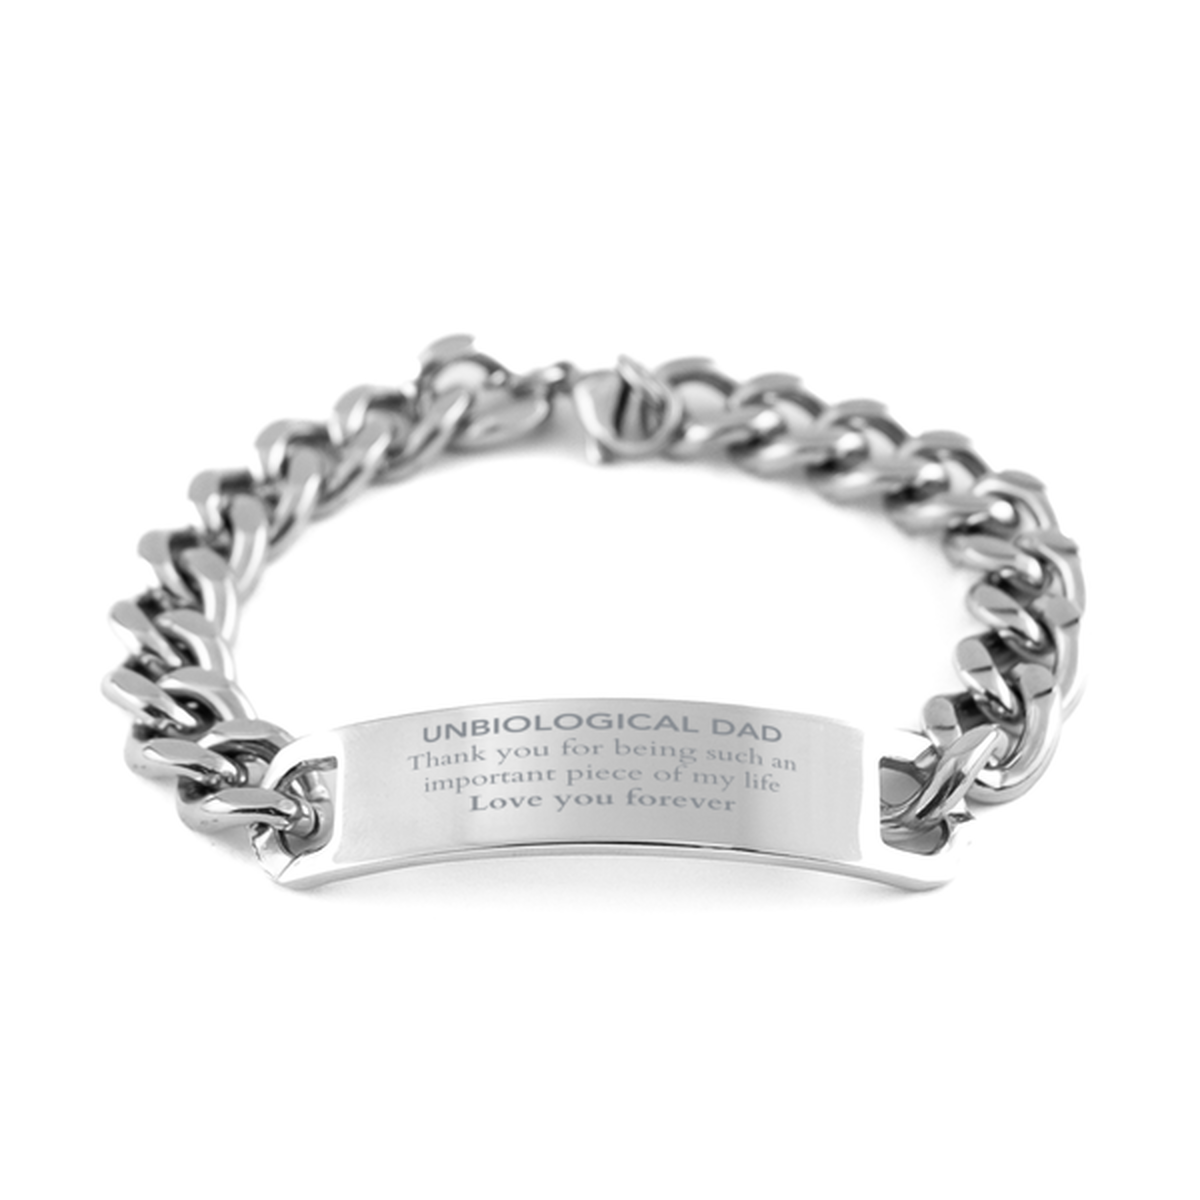 Appropriate Unbiological Dad Cuban Chain Stainless Steel Bracelet Epic Birthday Gifts for Unbiological Dad Thank you for being such an important piece of my life Unbiological Dad Christmas Mothers Fathers Day